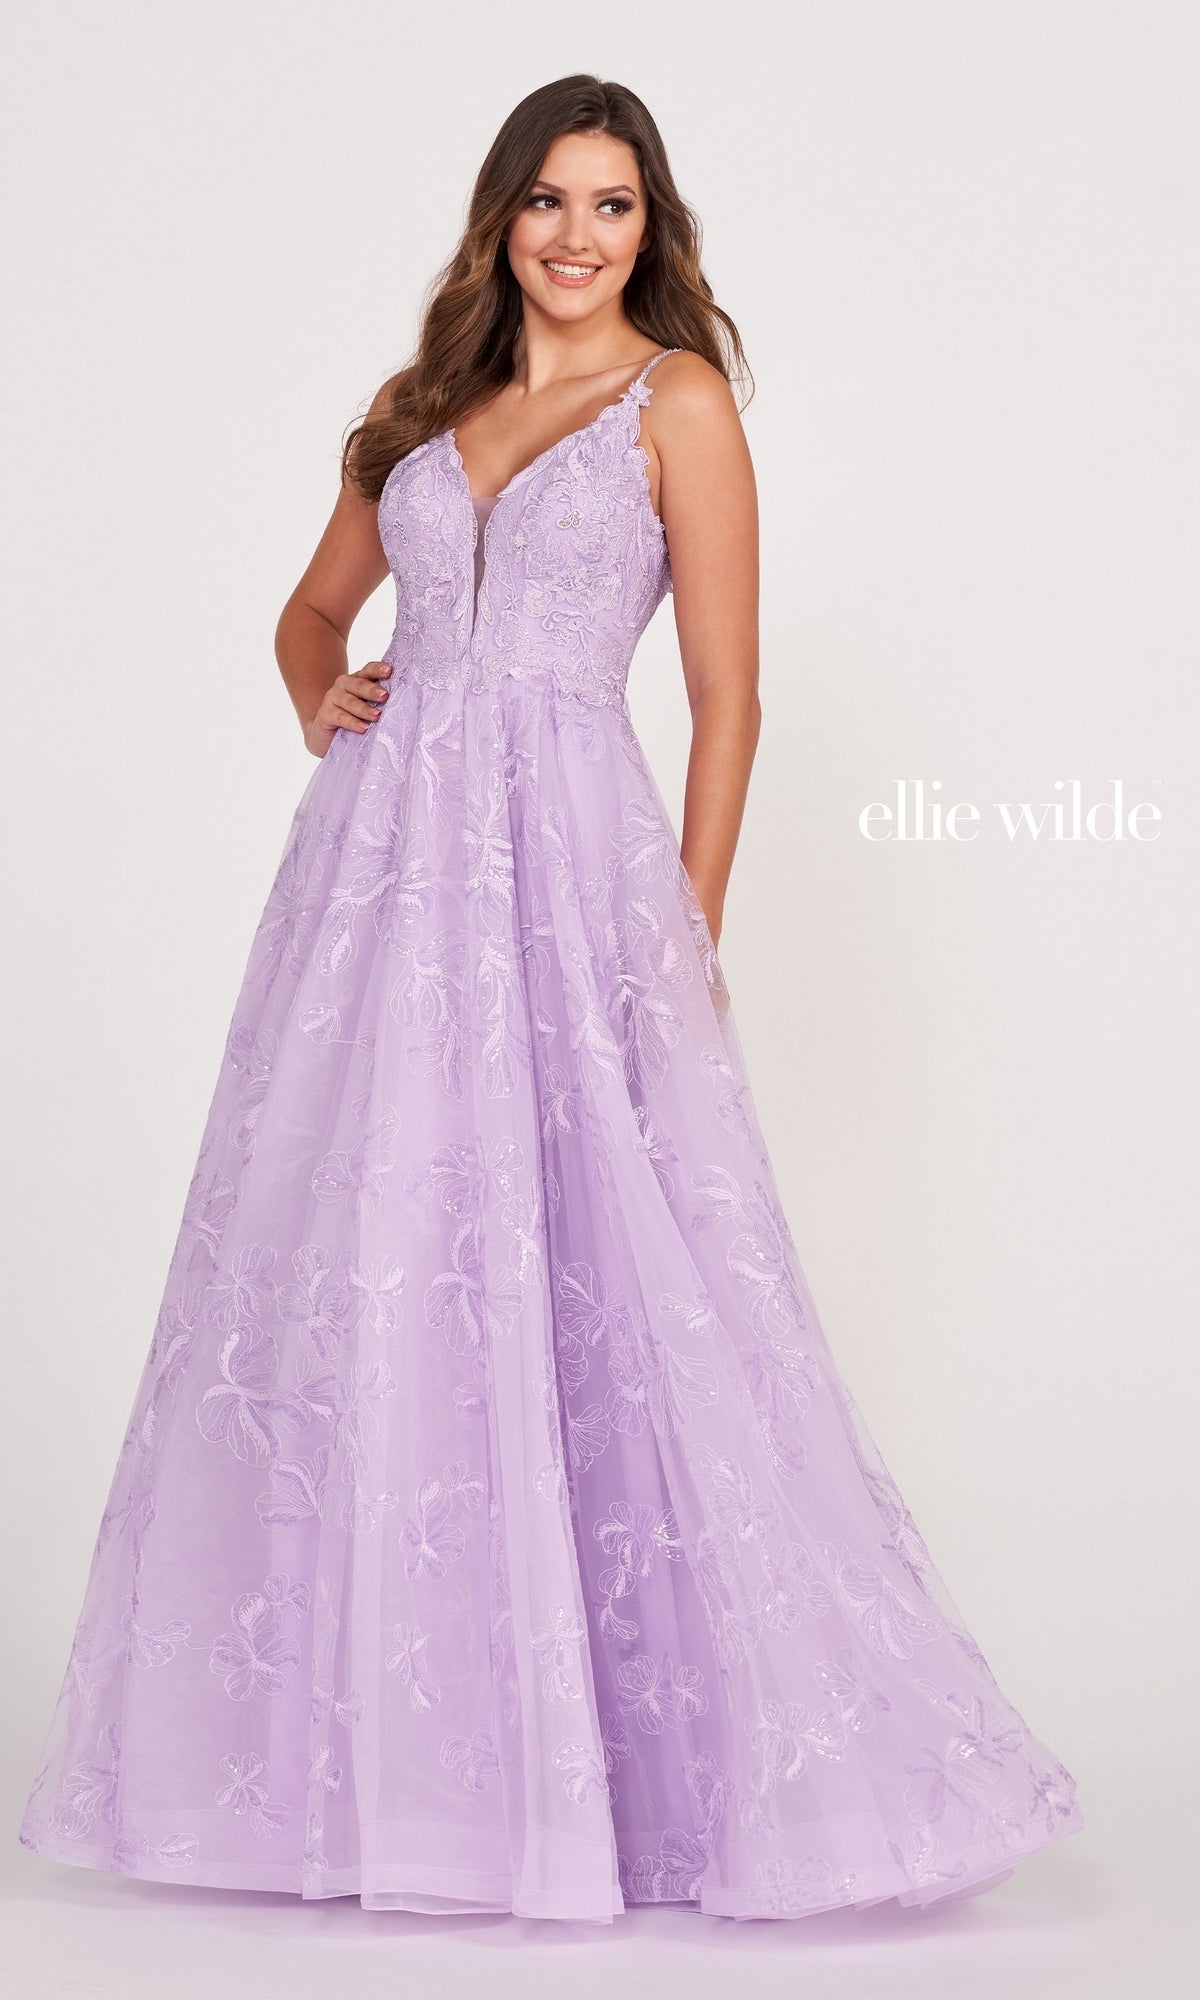 Tulle Embroidered A-Line Prom Dress by Ellie Wilde